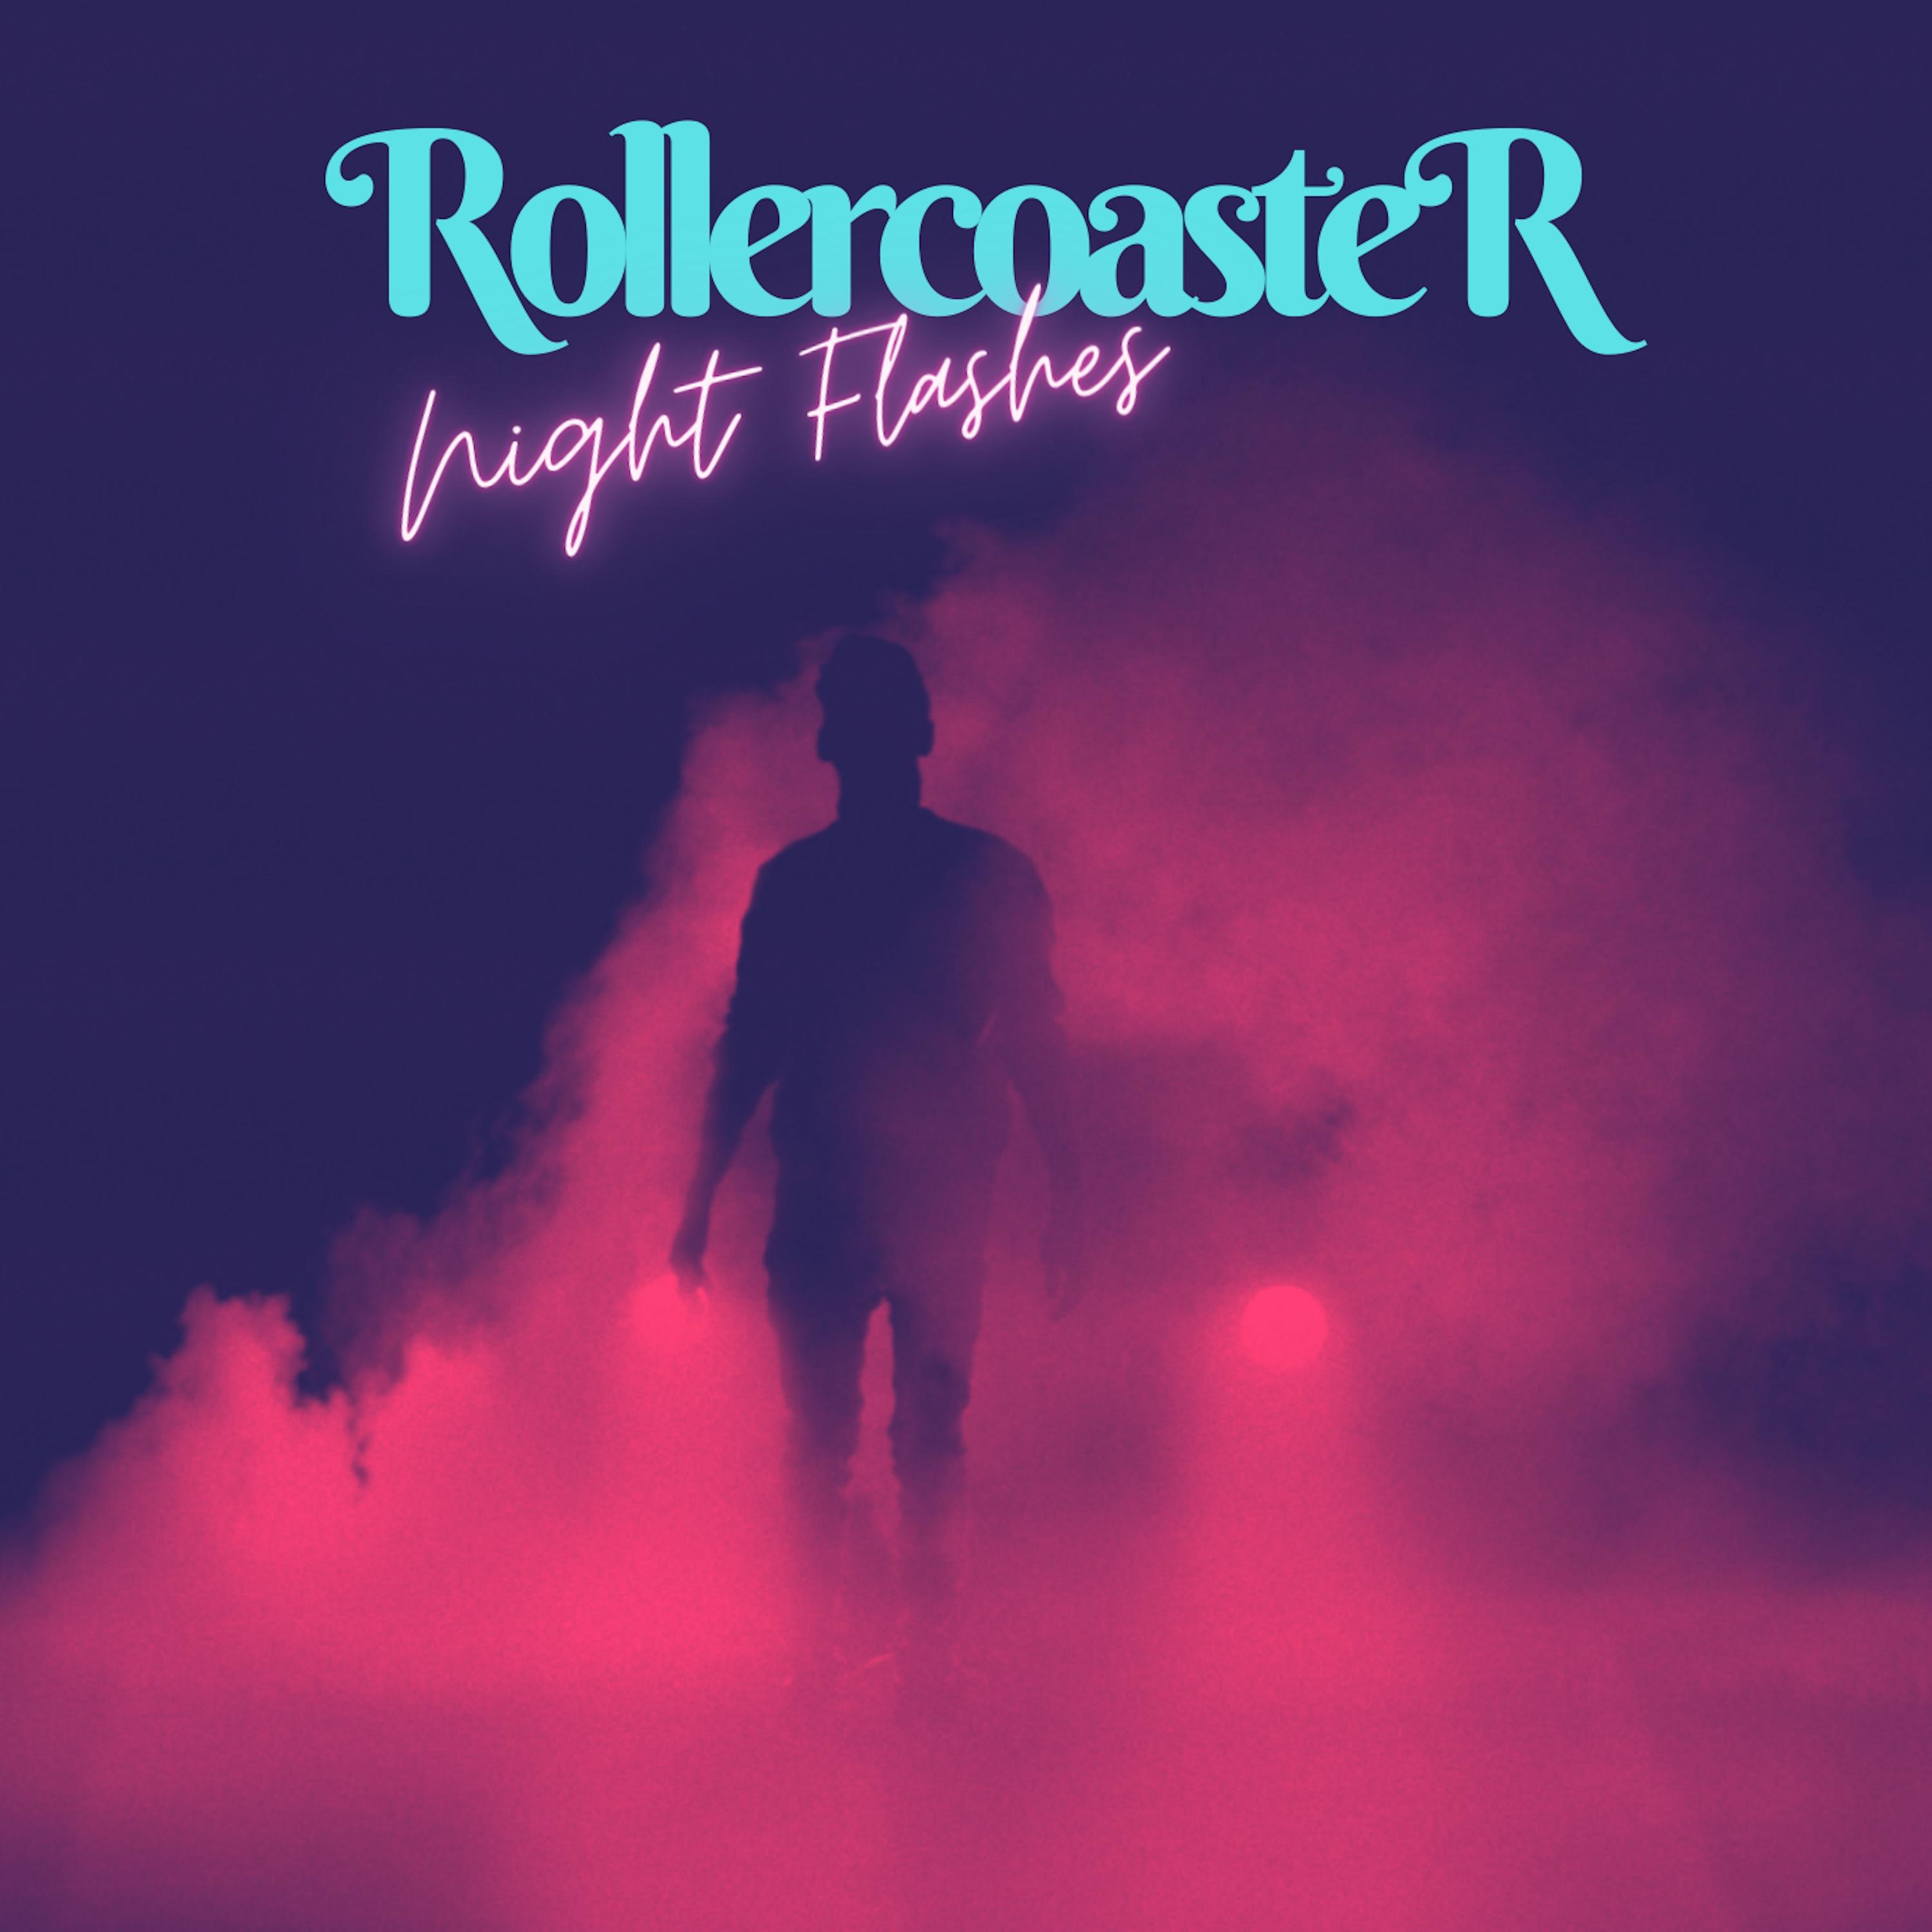 Rollercoaster - Destroy visions